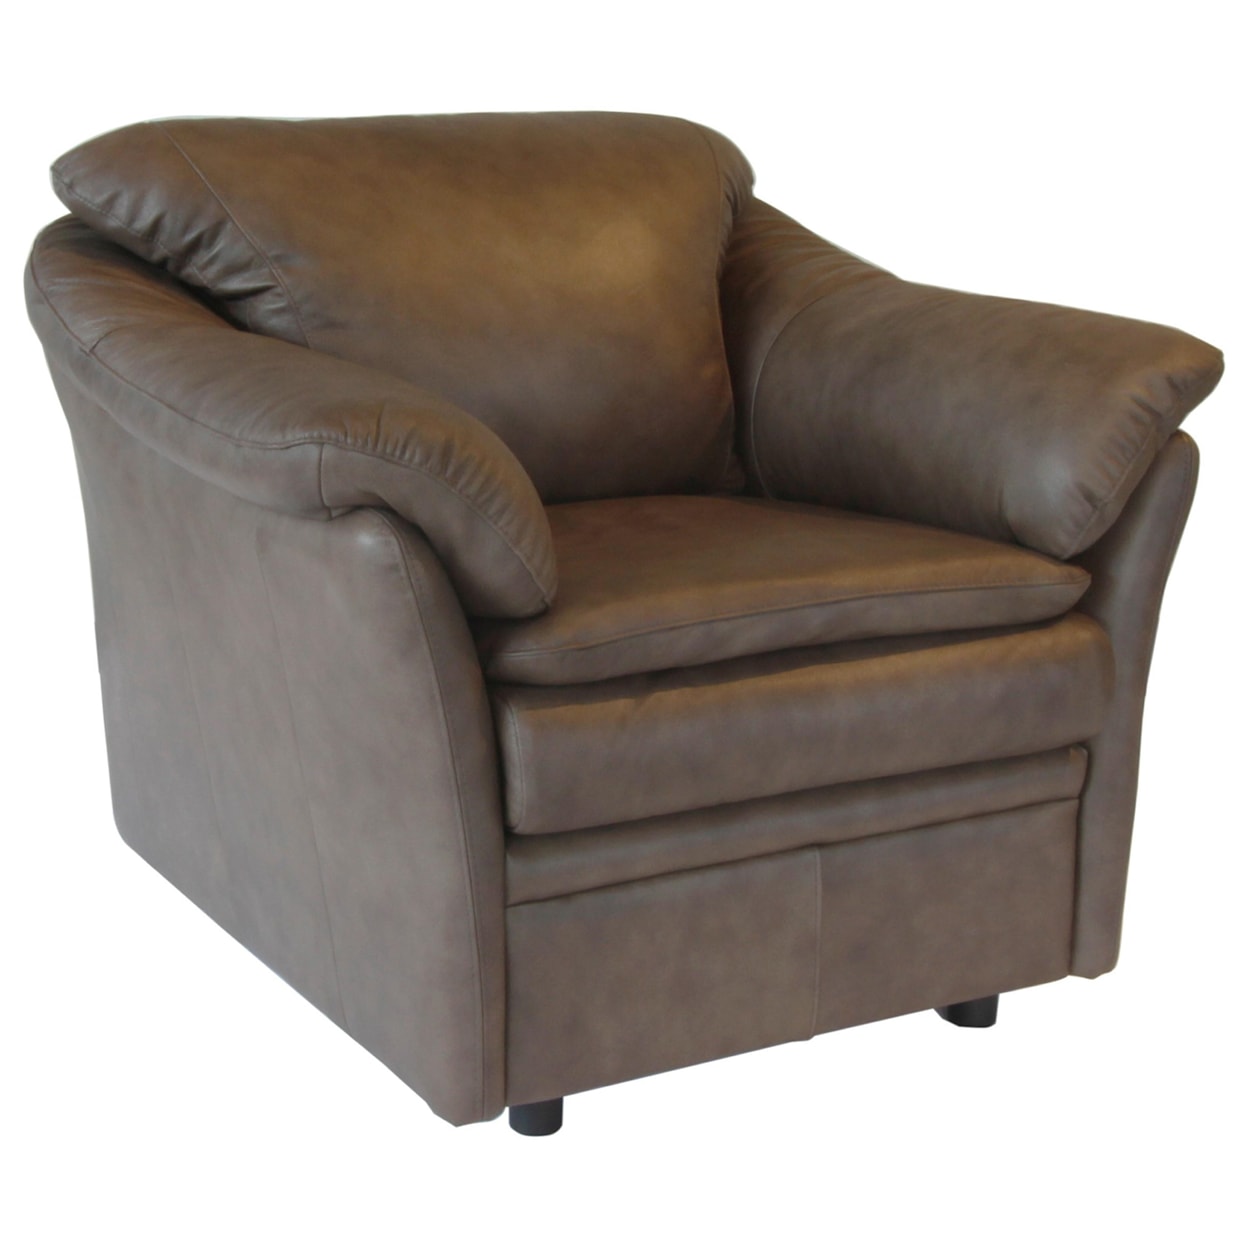 Omnia Leather Uptown Chair